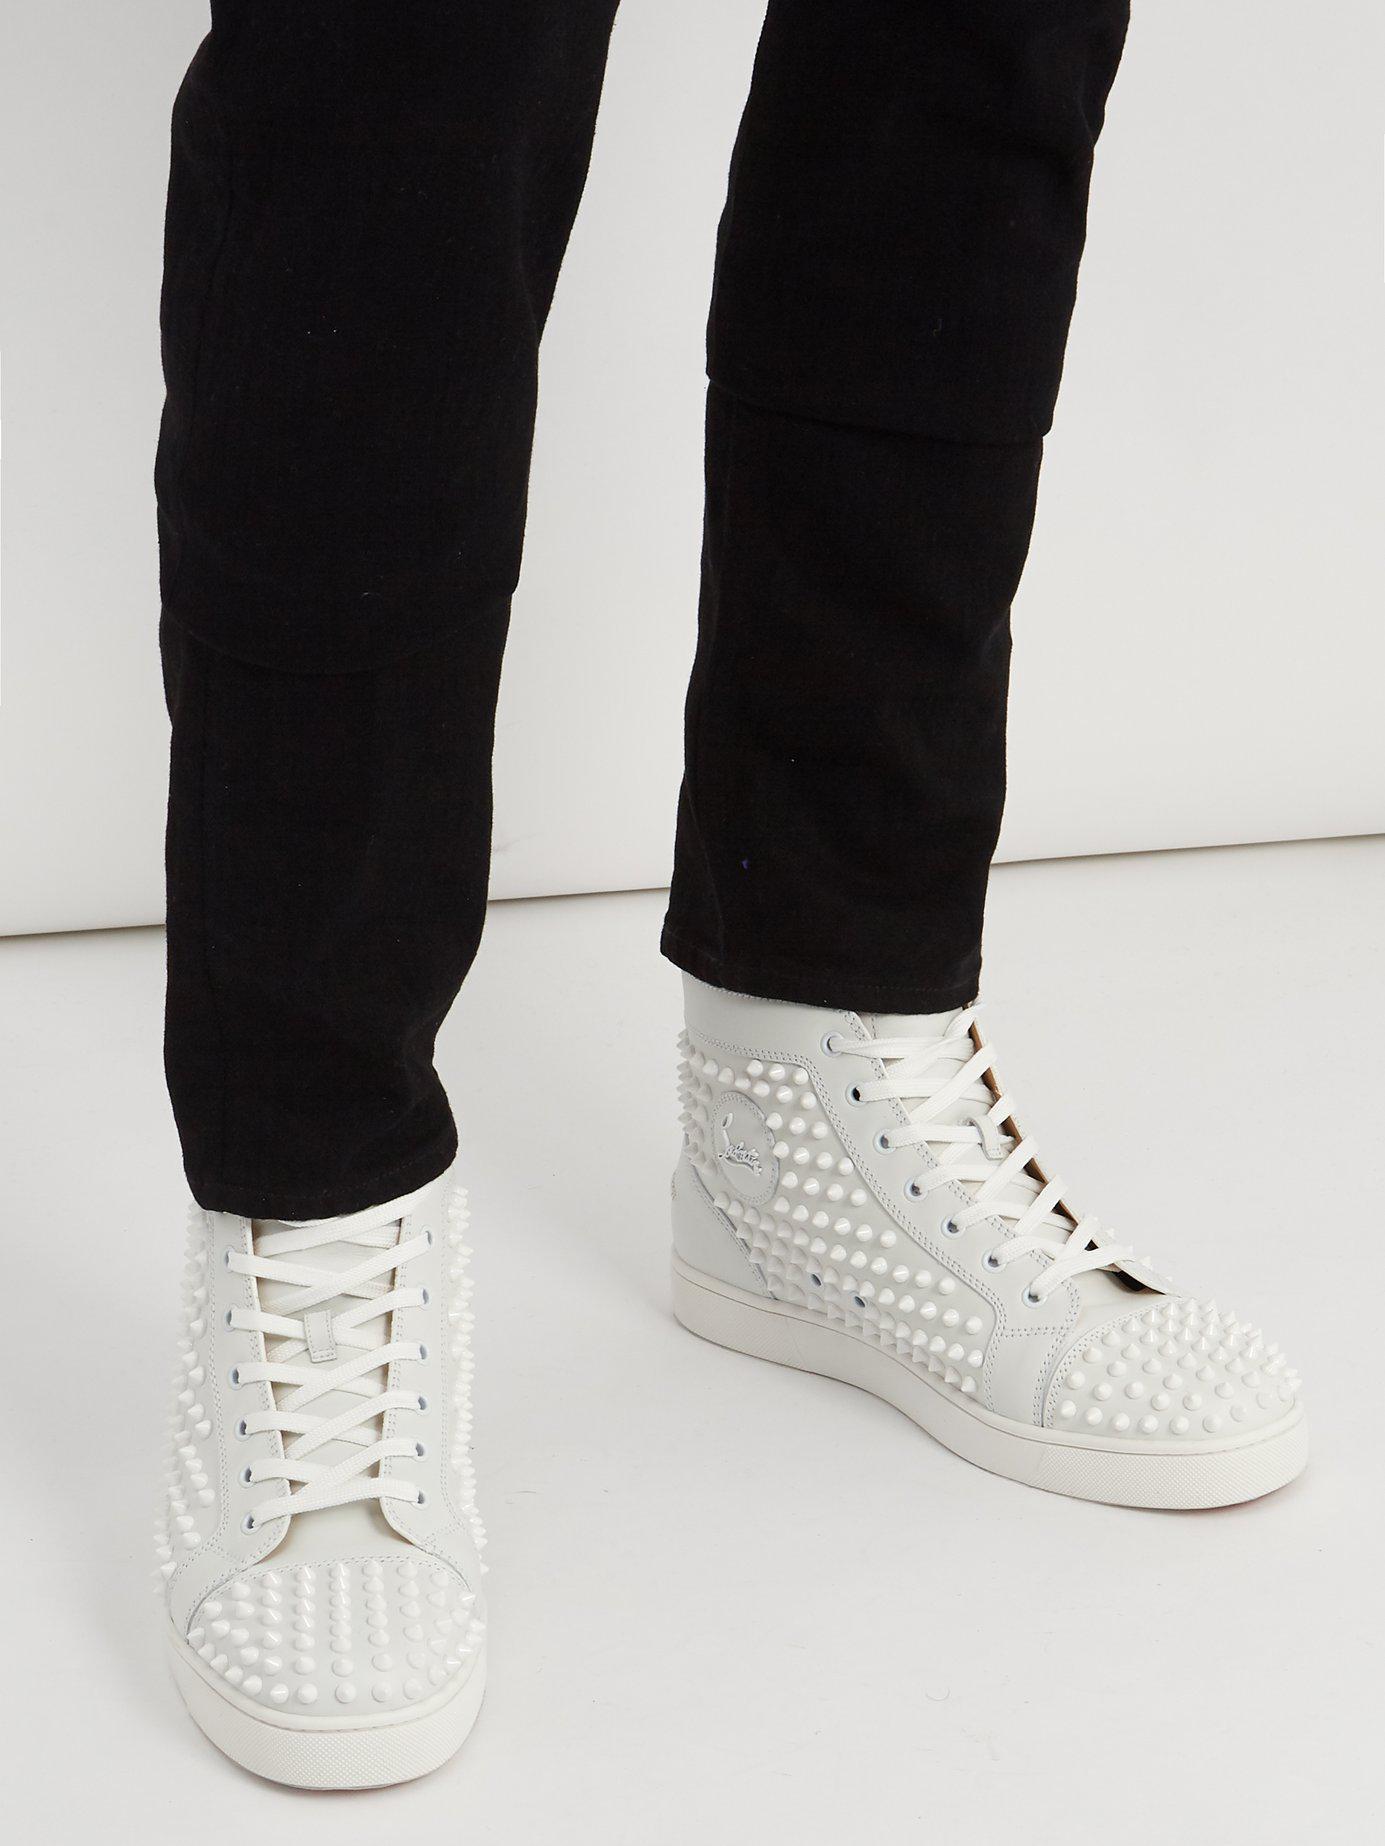 Christian Louboutin Men's Louis Spikes Flat High-Top Sneakers Studded  Leather White 2151701